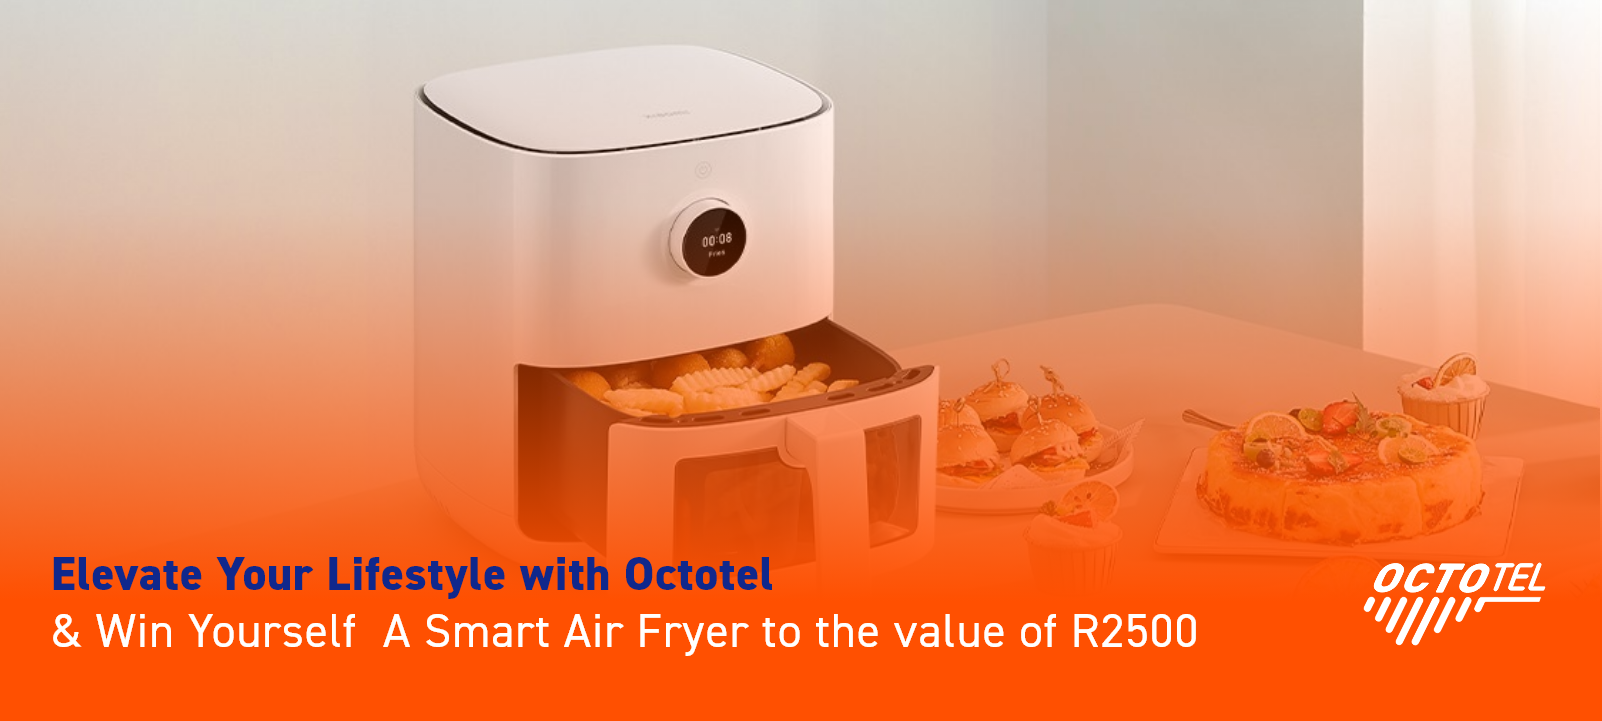 ELEVATING YOUR LIFESTYLE WITH OCTOTEL FIBRE: THE FUTURE OF KITCHEN APPLIANCES.